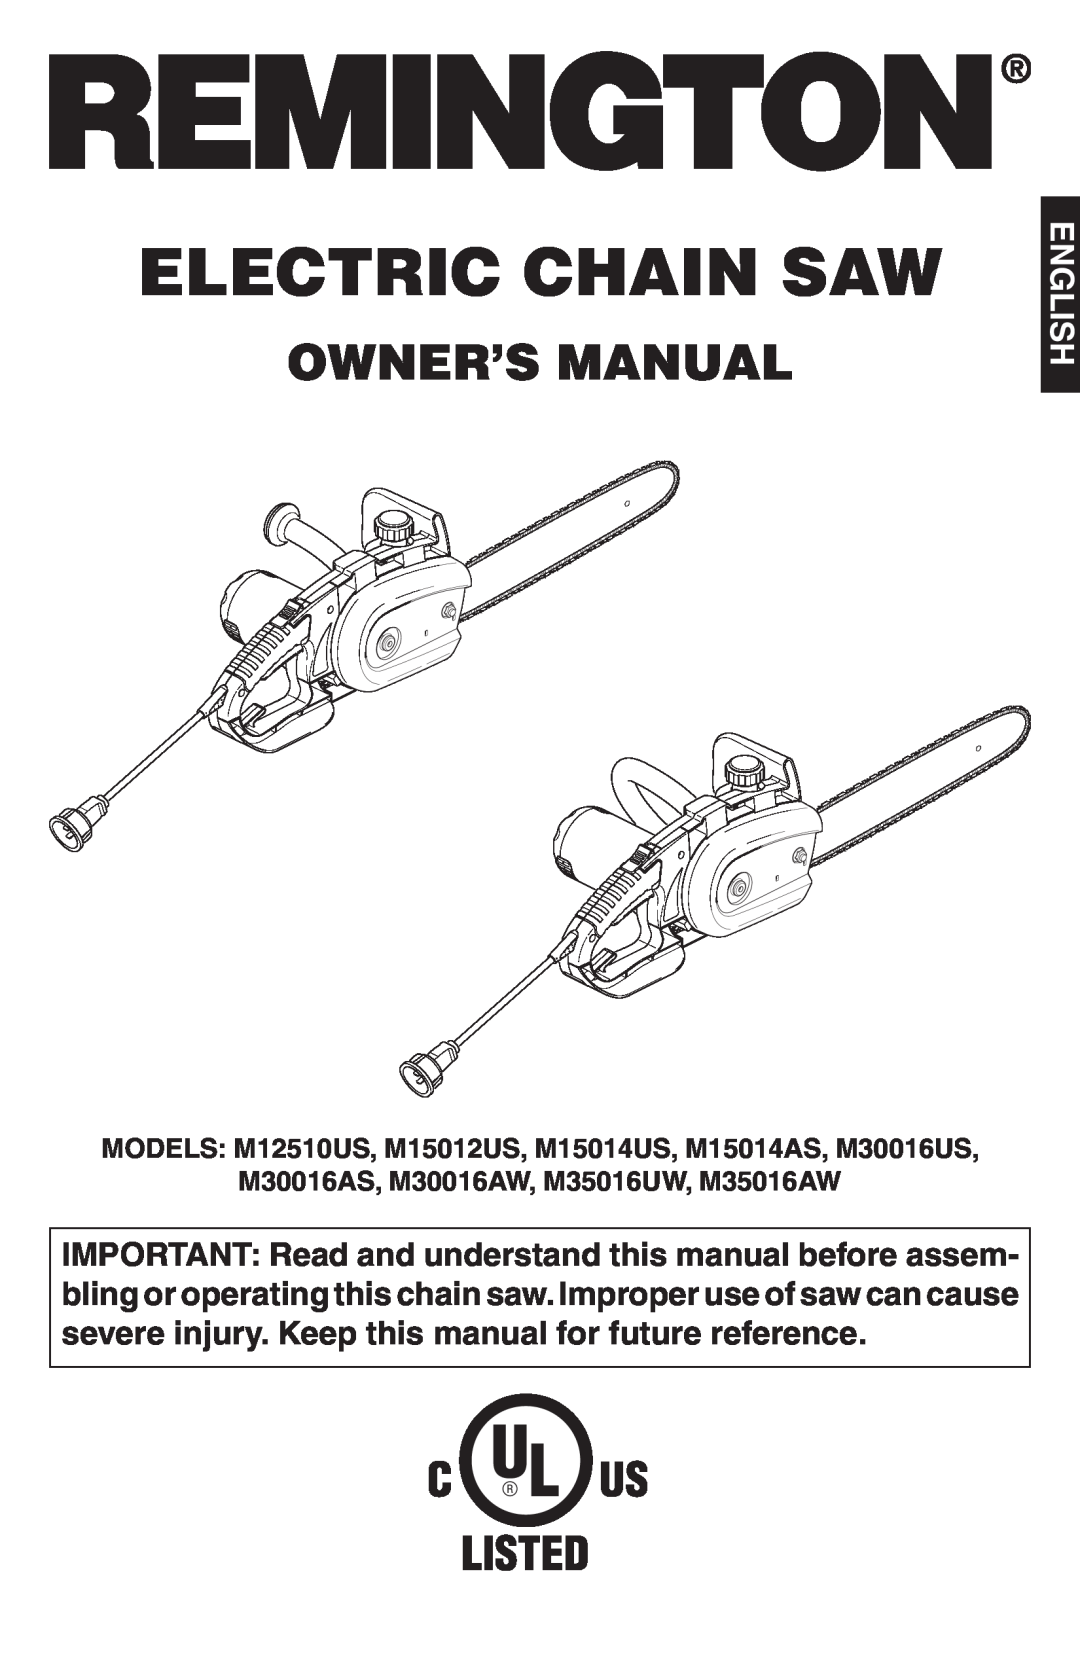 Remington Power Tools Electric Chain Saw Owner’S Manual, English, MODELS M12510US, M15012US, M15014US, M15014AS, M30016US 